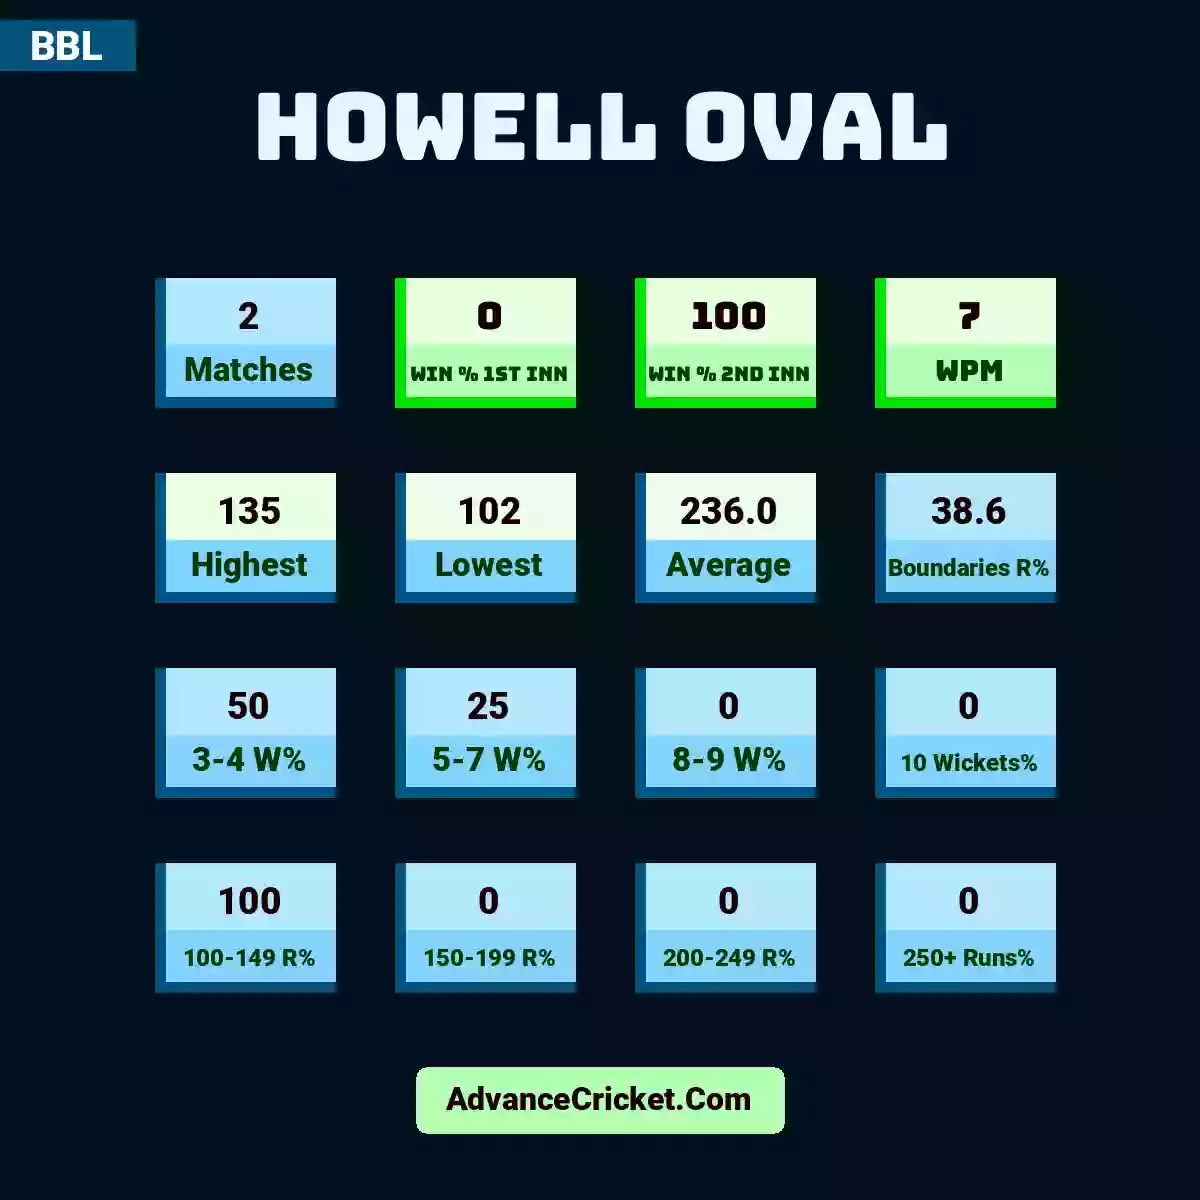 Image showing Howell Oval with Matches: 2, Win % 1st Inn: 0, Win % 2nd Inn: 100, WPM: 7, Highest: 135, Lowest: 102, Average: 236.0, Boundaries R%: 38.6, 3-4 W%: 50, 5-7 W%: 25, 8-9 W%: 0, 10 Wickets%: 0, 100-149 R%: 100, 150-199 R%: 0, 200-249 R%: 0, 250+ Runs%: 0.